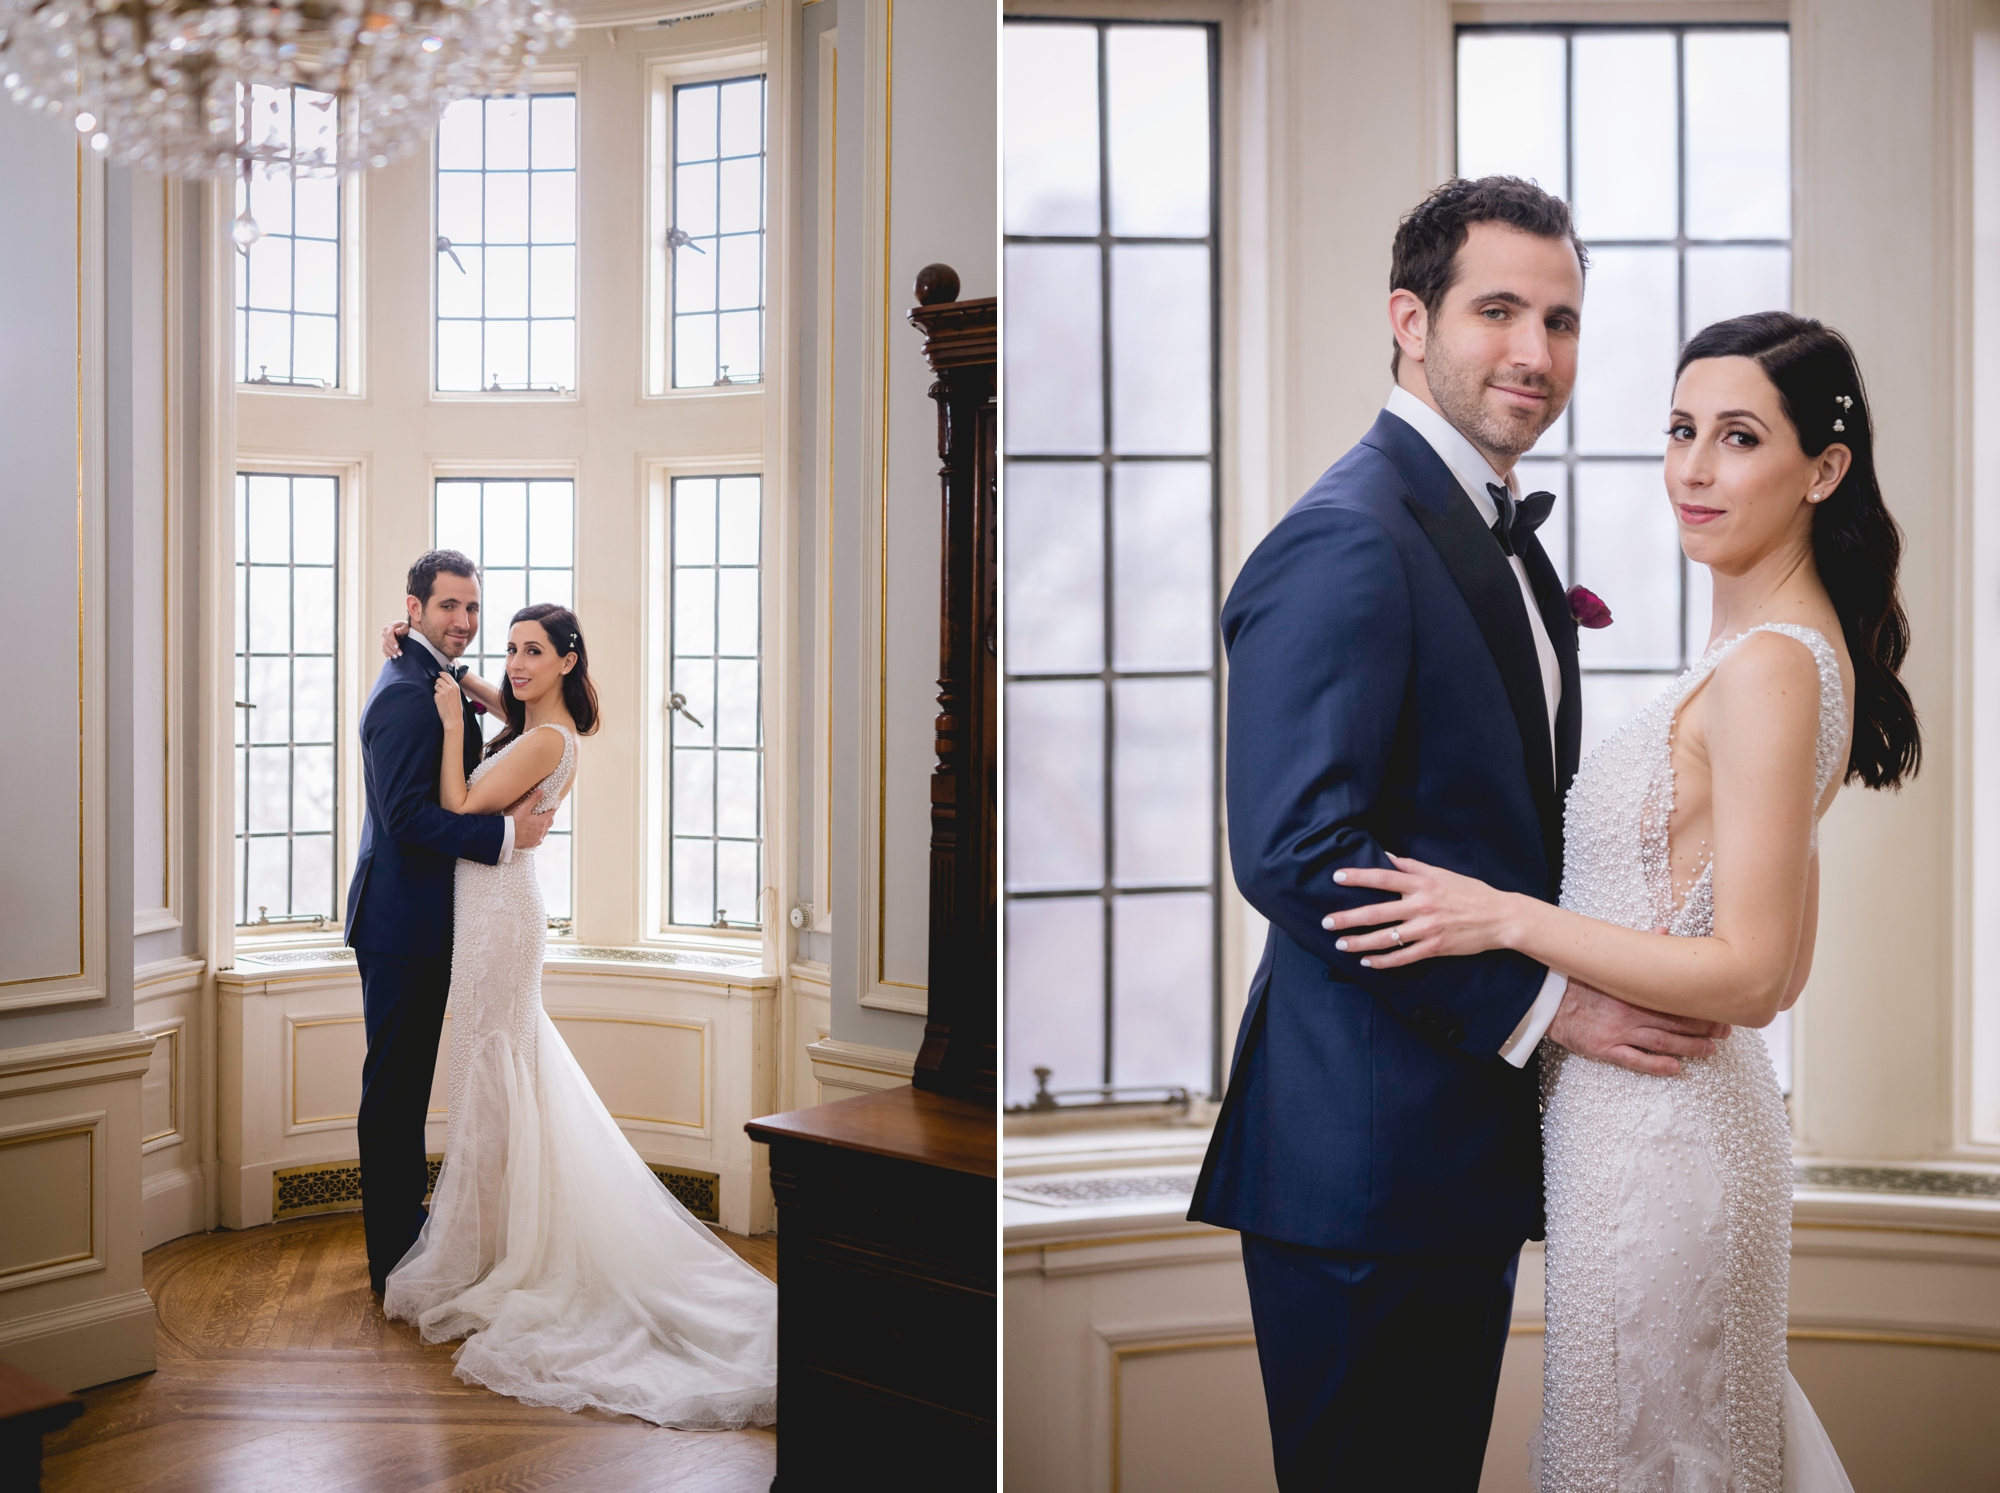 Portraits of the bride and groom together at Casa Loma in Toronto